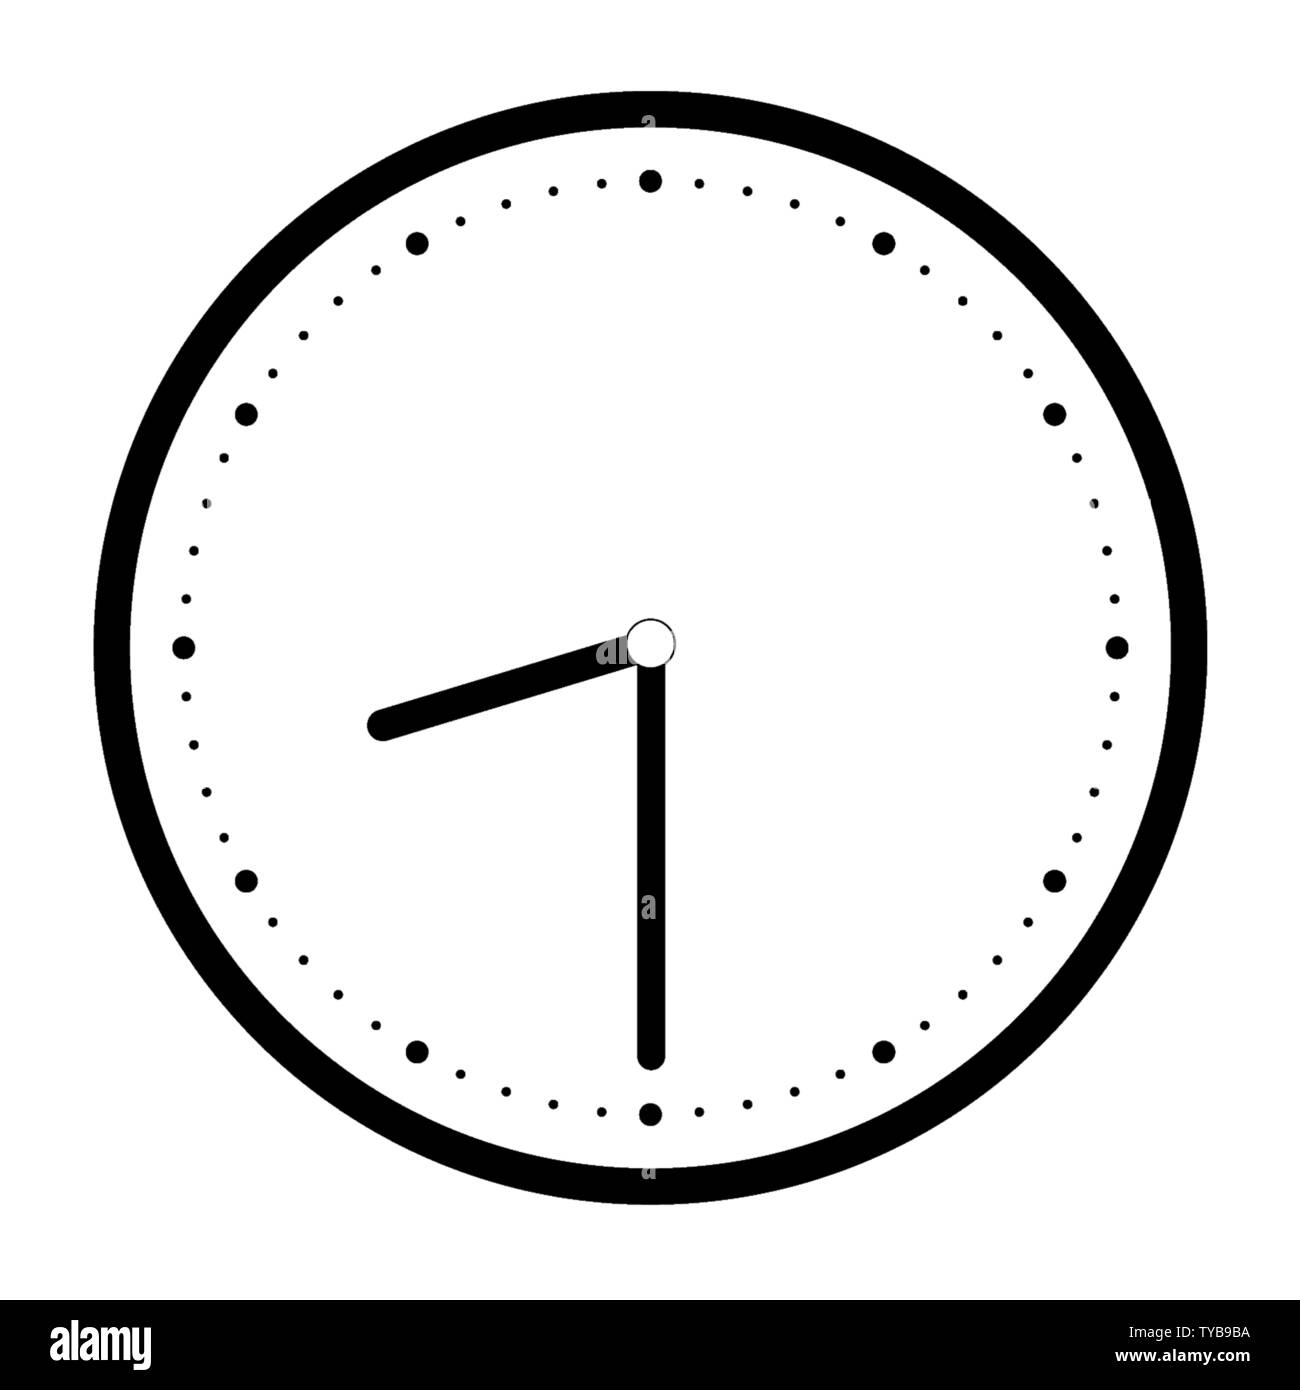 Illustration of a simple clock face of white and black with an hour and minute hand - vector Stock Vector